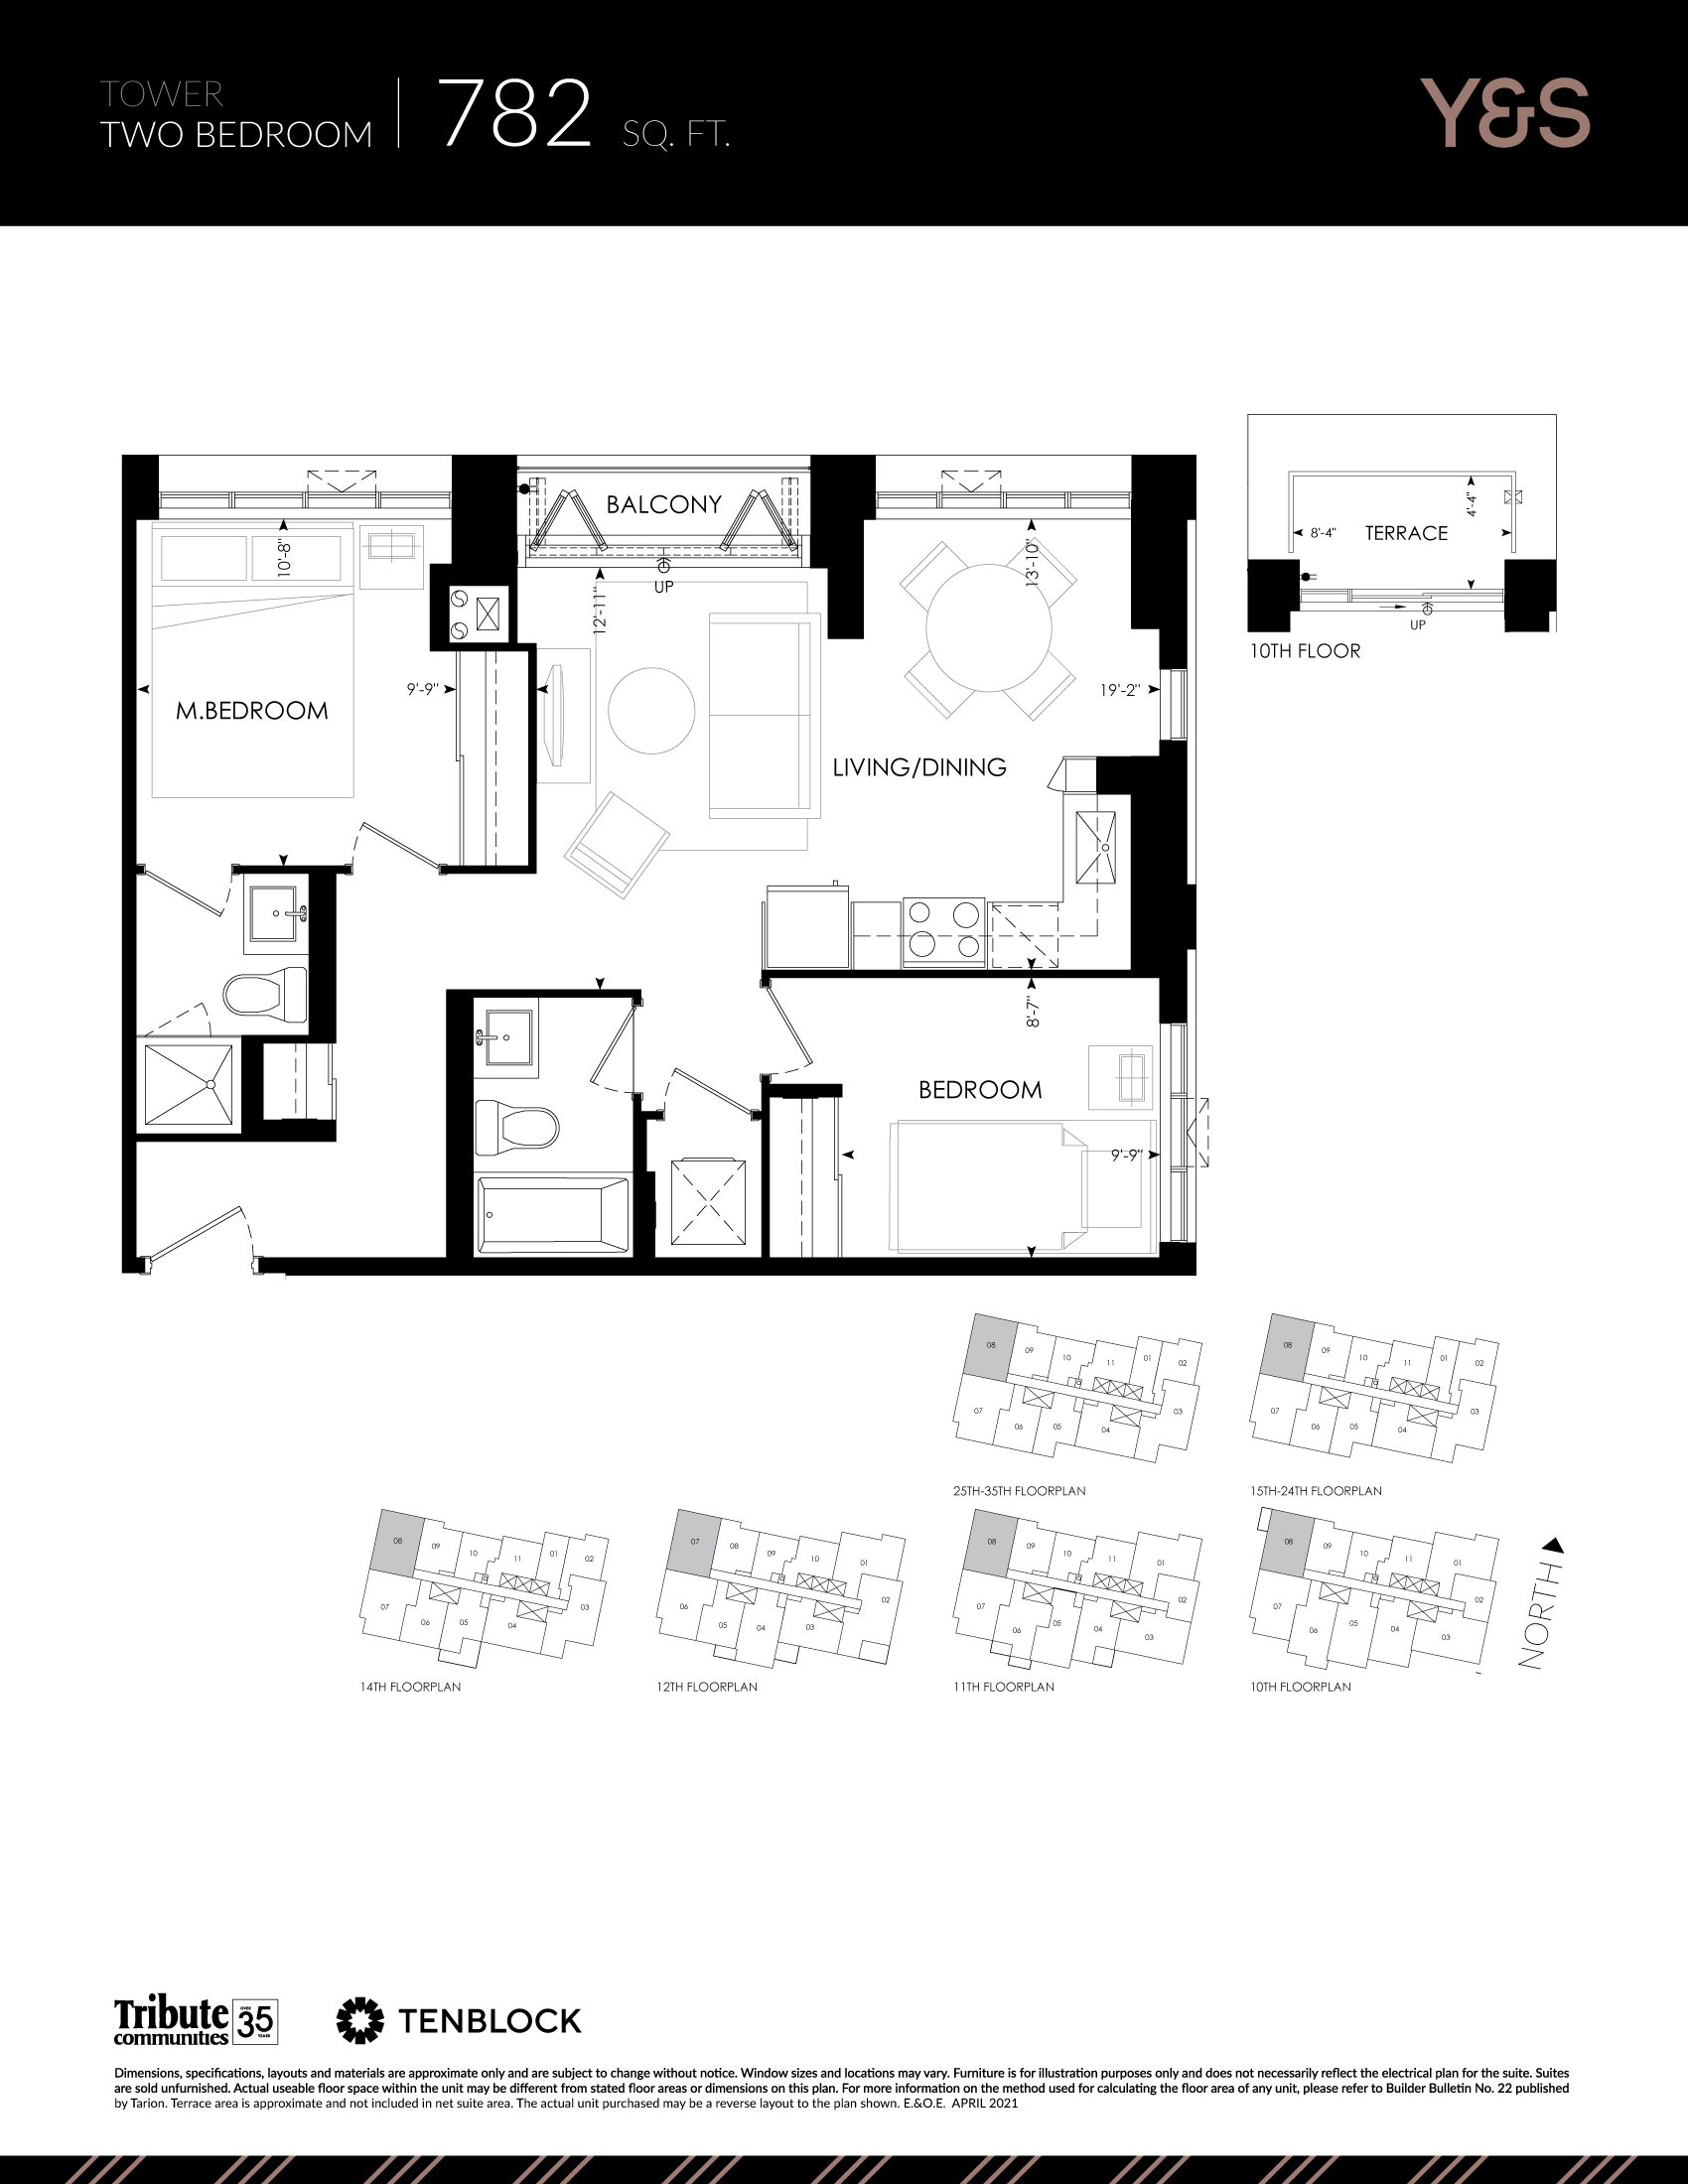 TWO BEDROOM-782 SQ. FT.